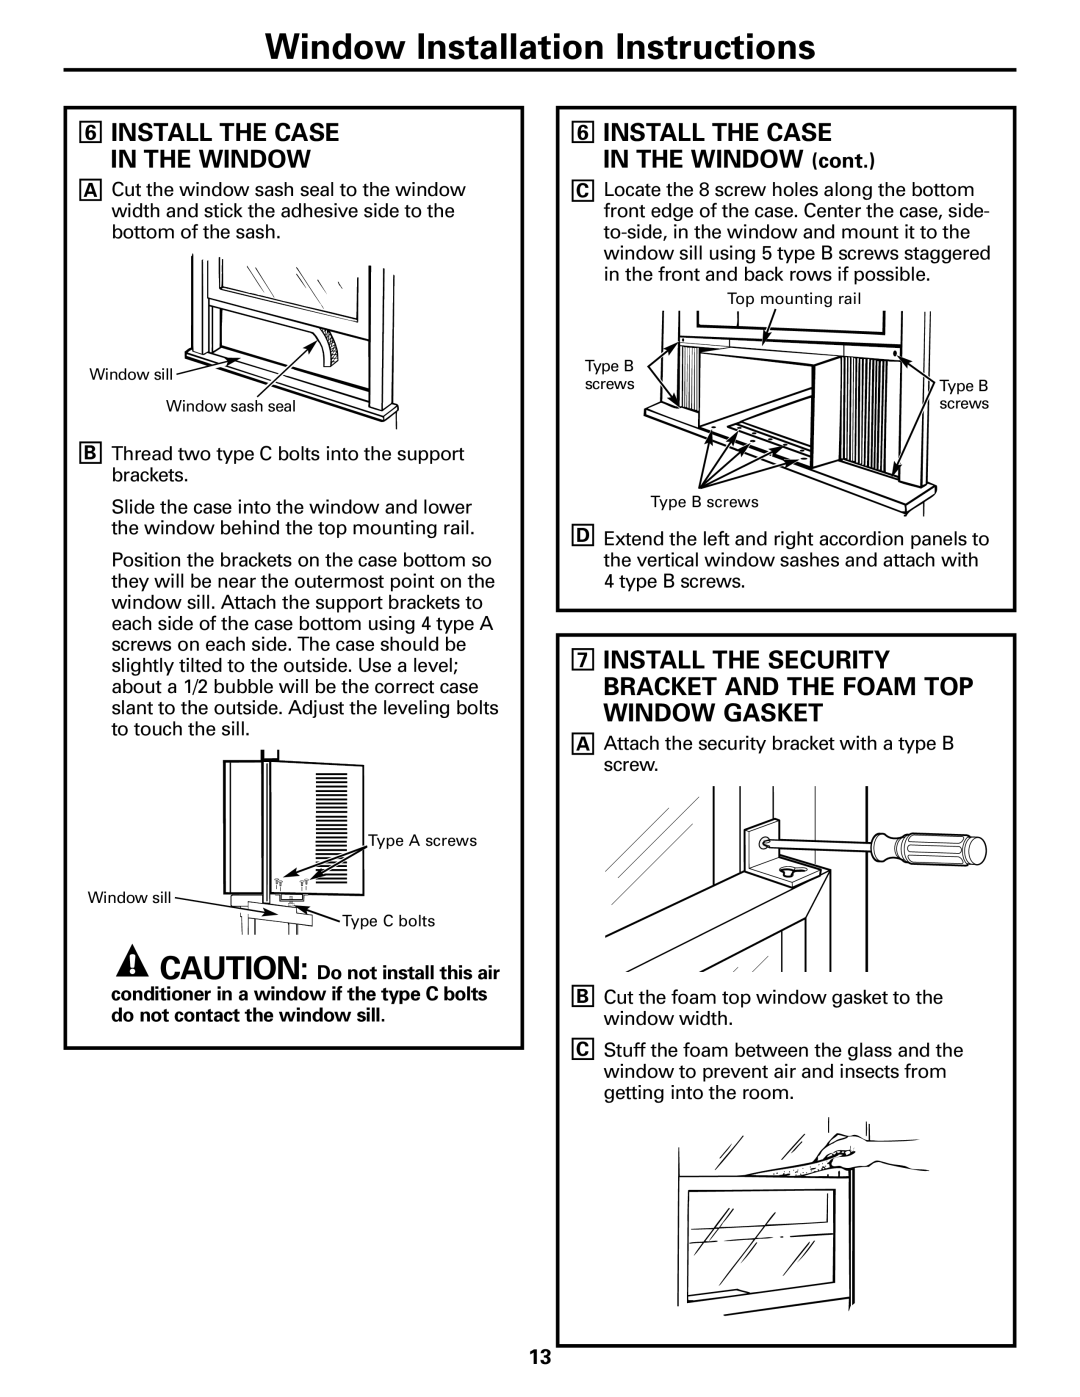 GE ASM24*, ASM14*, ASQ18 installation instructions 6INSTALL THE CASE IN THE WINDOW cont, Window Installation Instructions 